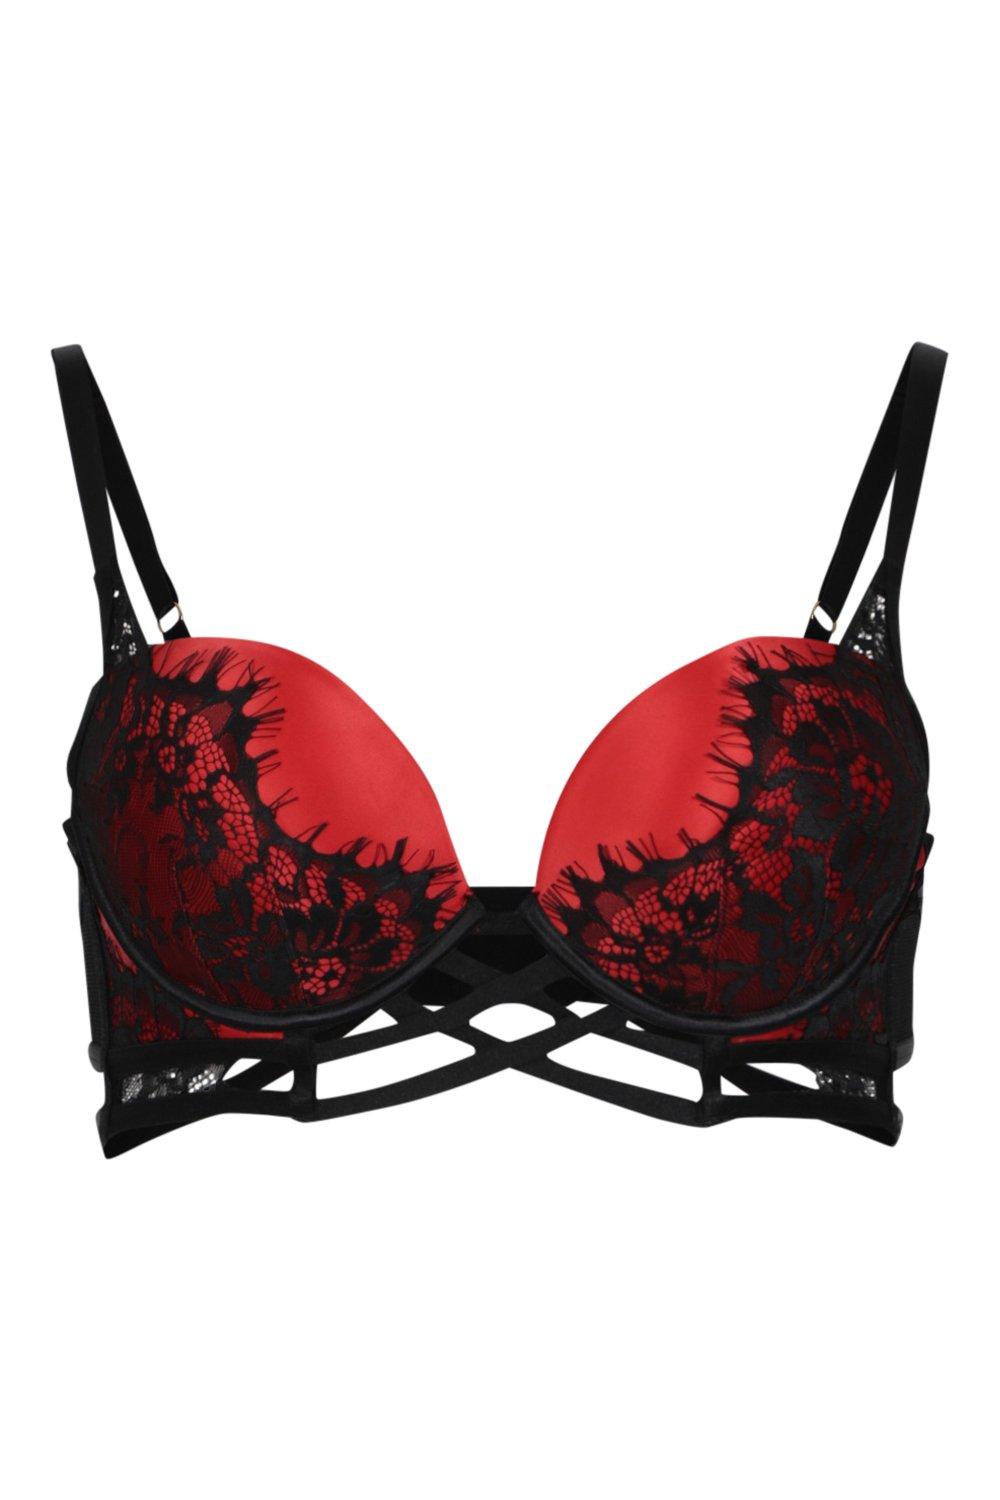 https://media.boohoo.com/i/boohoo/lzz87501_red_xl_4/female-red-satin-strapping-triple-boost-push-up-bra